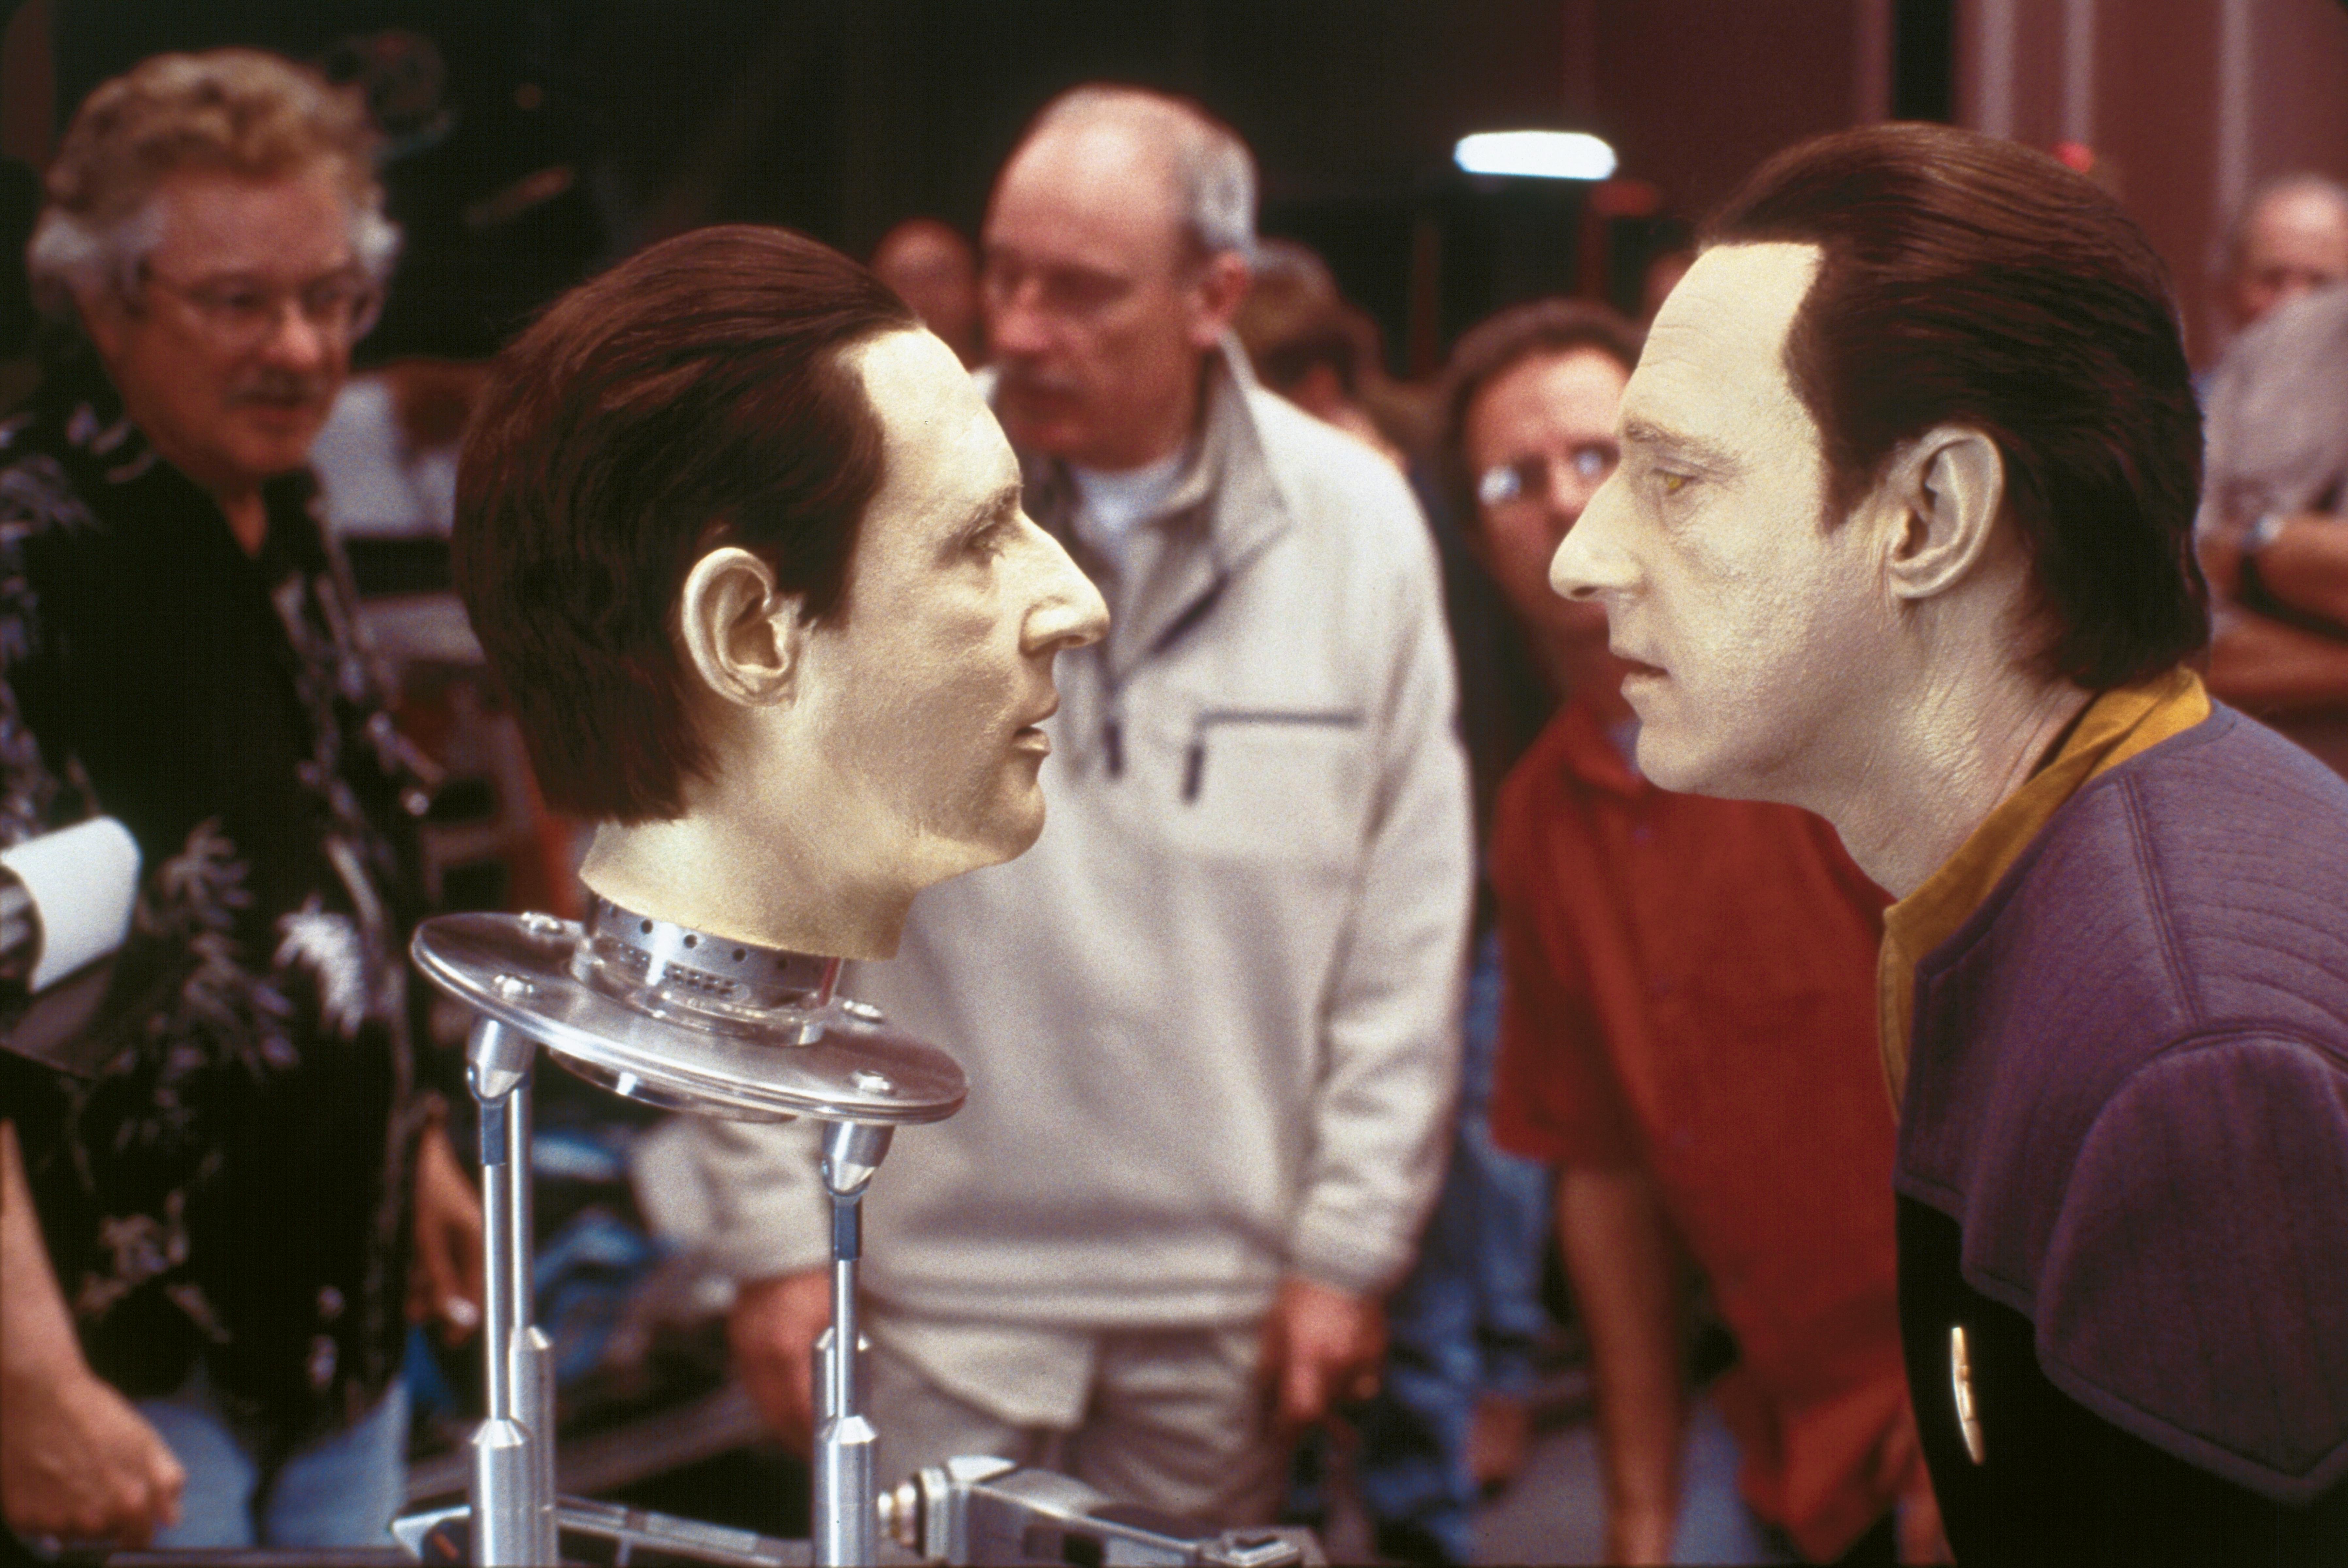 Brent Spiner (right) dressed as Data looking at the head of B-4 as crew look behind them on set of Star Trek Nemesis